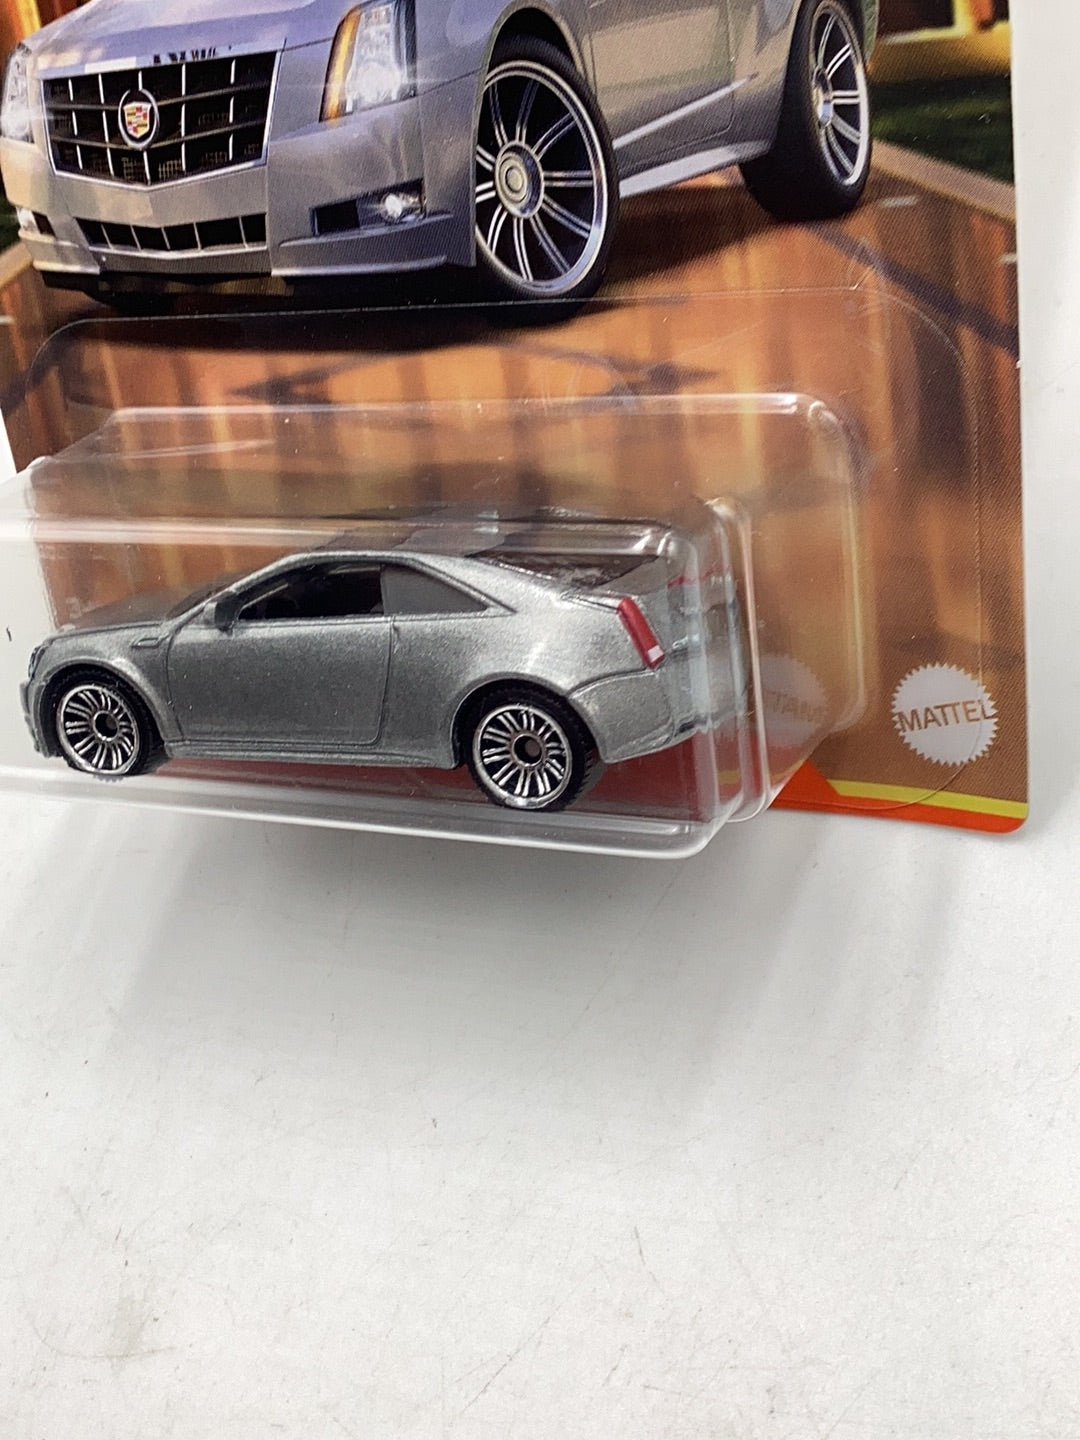 2021 Matchbox Cadillac collection Cadillac CTS Coupe Walmart exclusive 2/12 161A